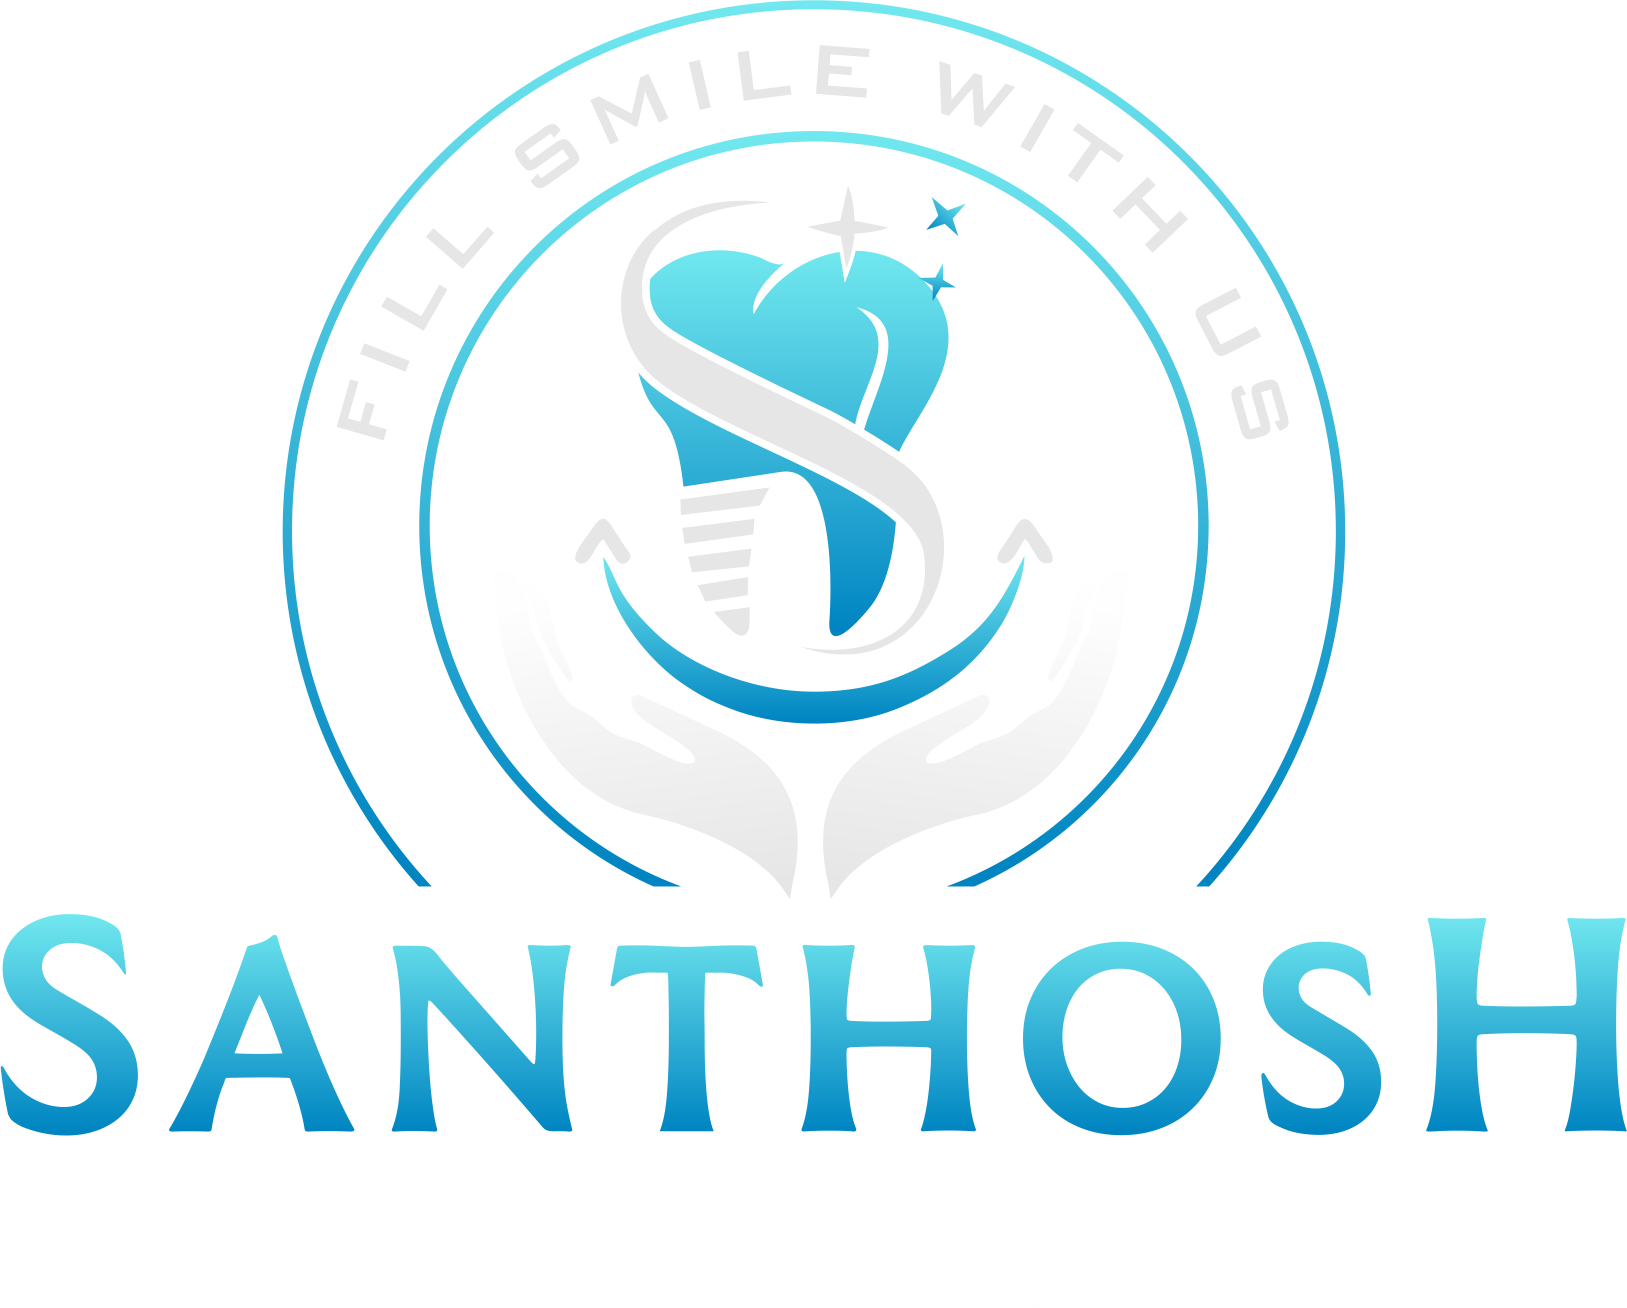 cosmetic dentistry near me